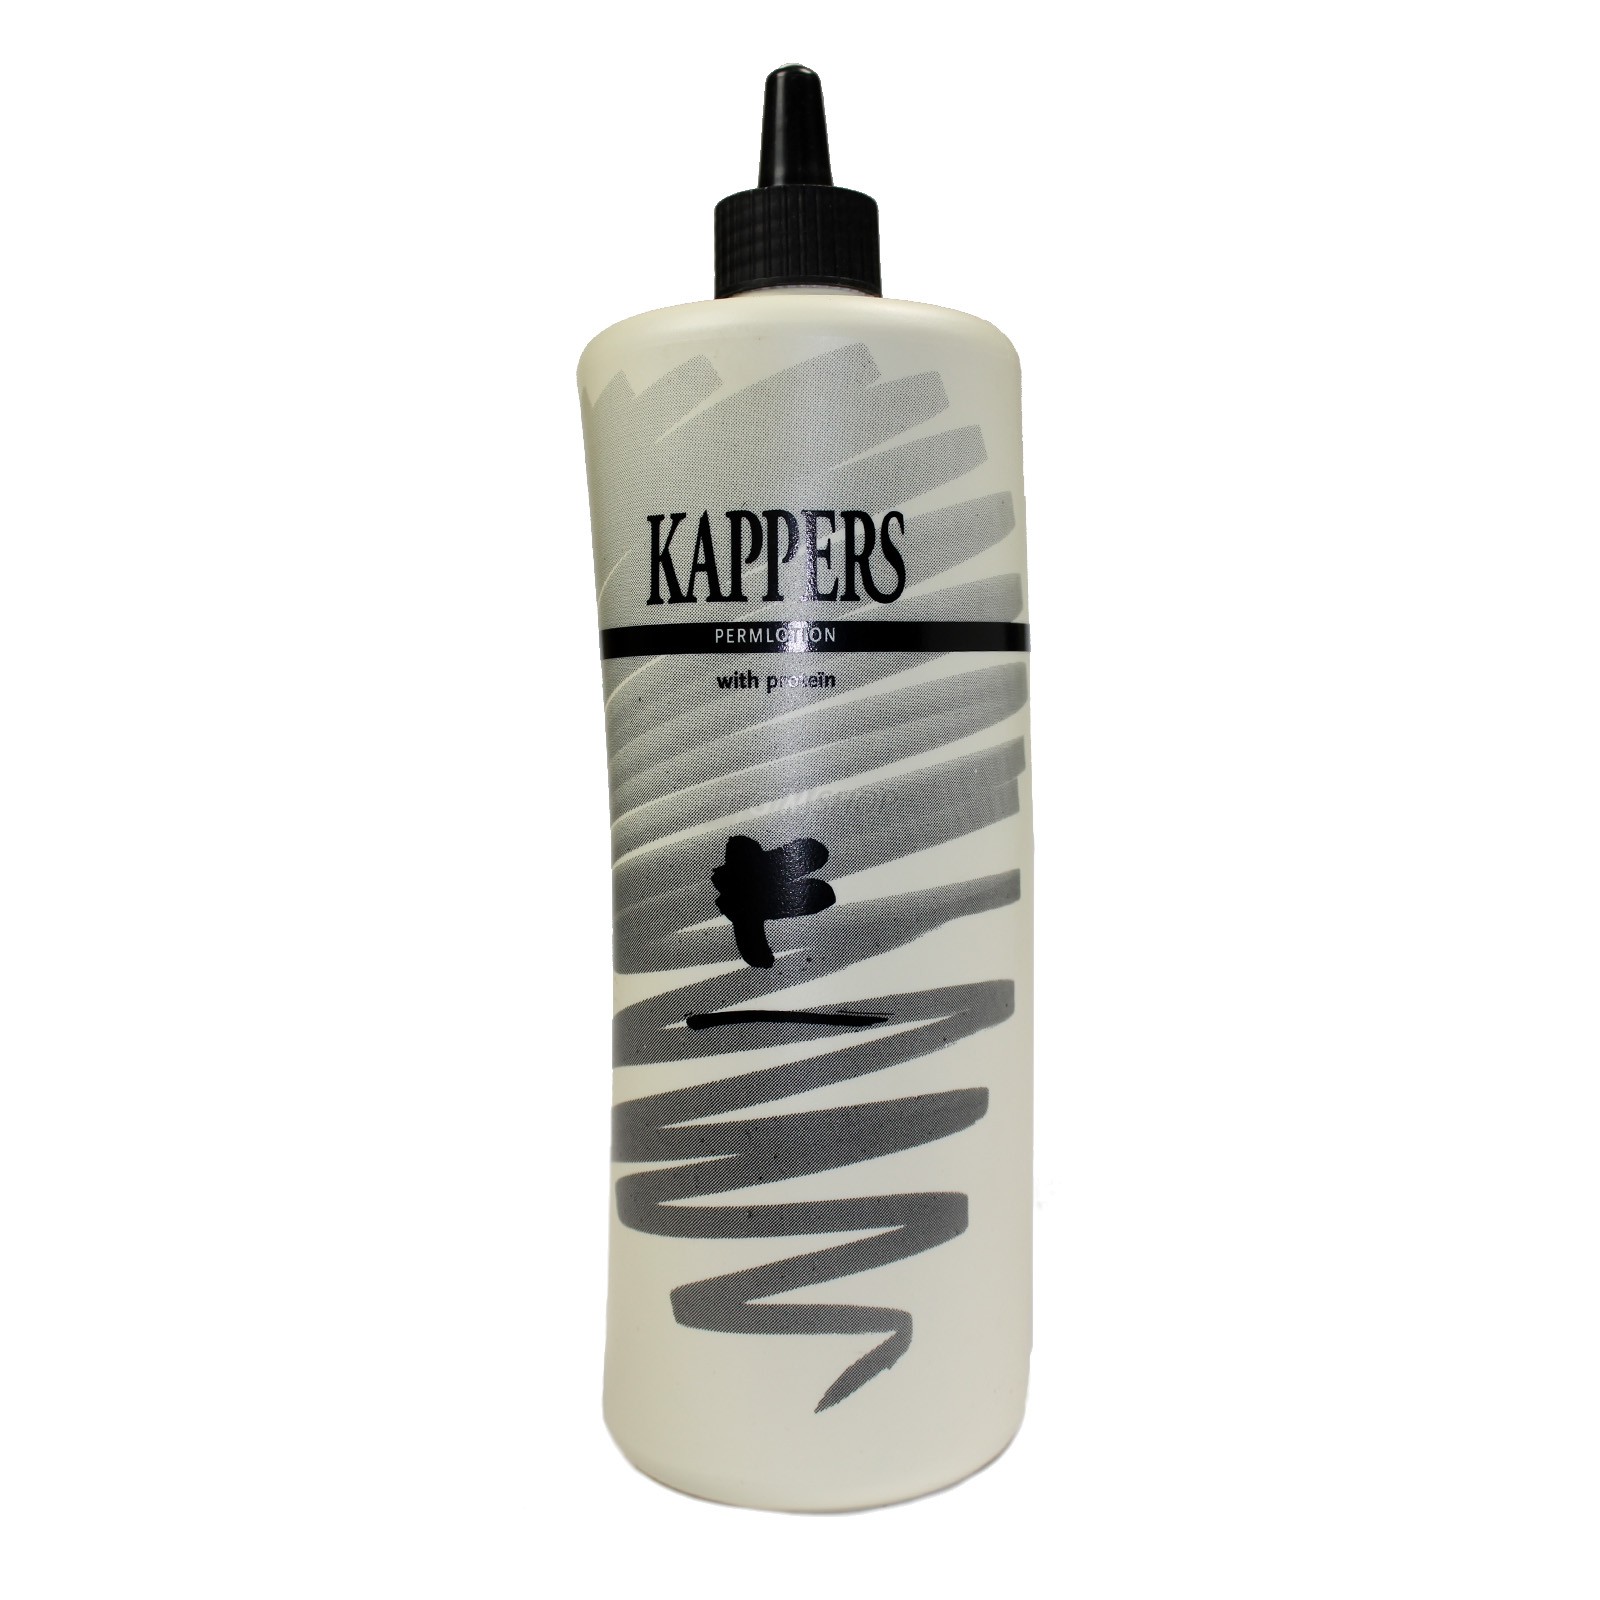 Kappers - Permlotion mit Protein - Permlotion with protein - 1000ml